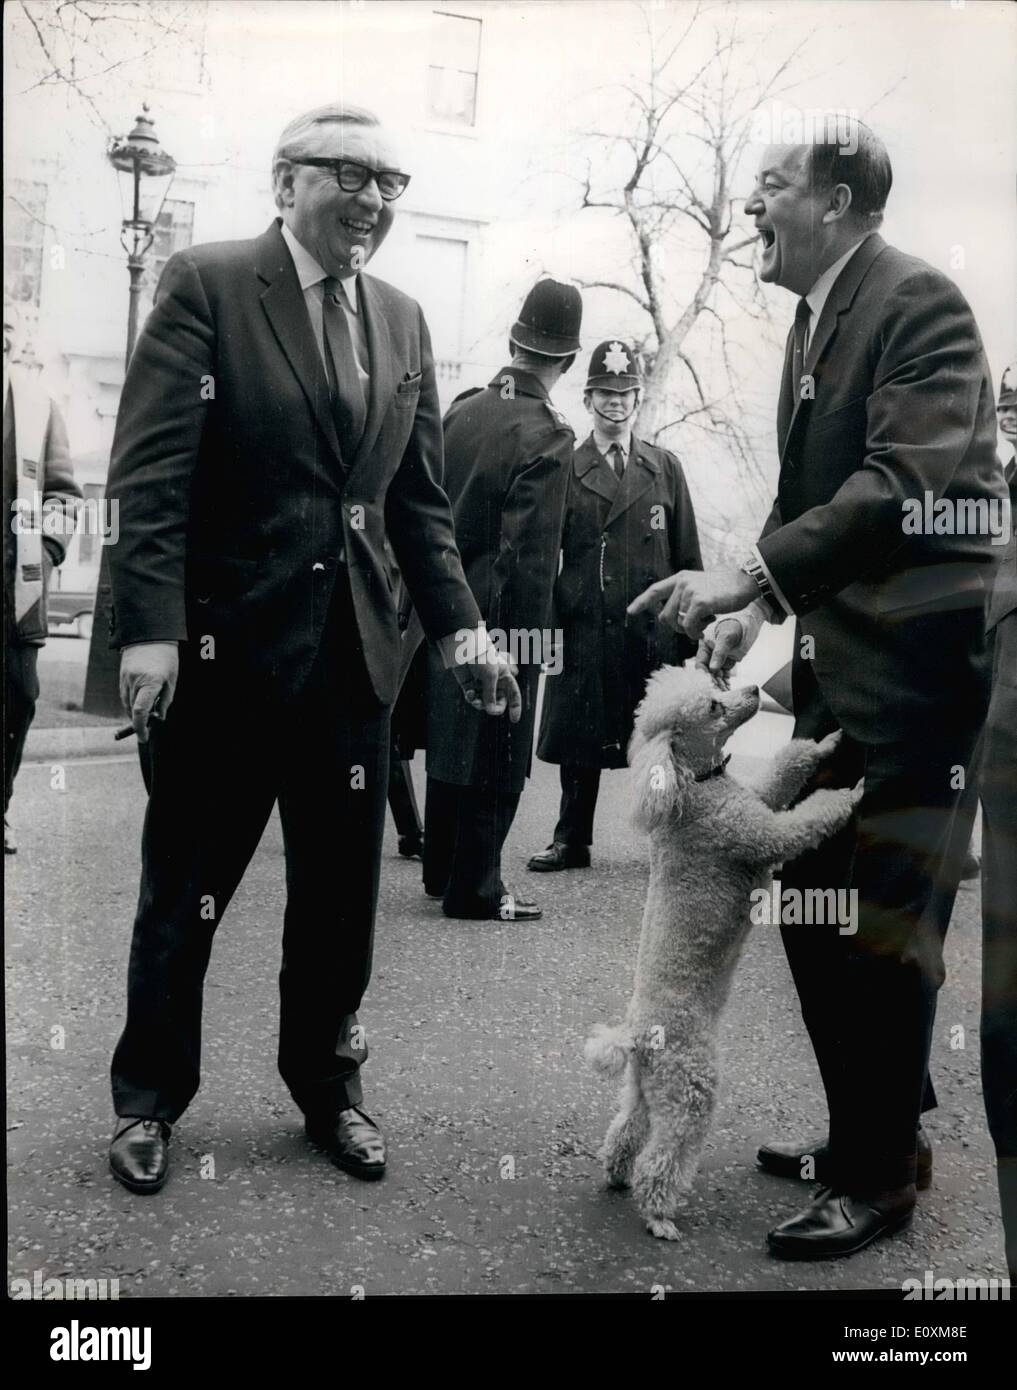 Apr. 04, 1967 - Mr. Humphrey Lunches with Mr. Brown. The American Vice President, Mr. Hubert Humphrey, who is in London, yesterday lunched with Mr. George Brown, Britain's Foreign Secretary at No. 1 Carlton Gardens, Mr. Brown's official residence. After lunch they went for a stroll and on their return Mr. Brown's white poodle Jenny ran out to greet them. Photo Shows: Mr. George Brown looks on with a smile as his poodle Jenny greets Mr. Humphrey on returning from their stroll. Stock Photo